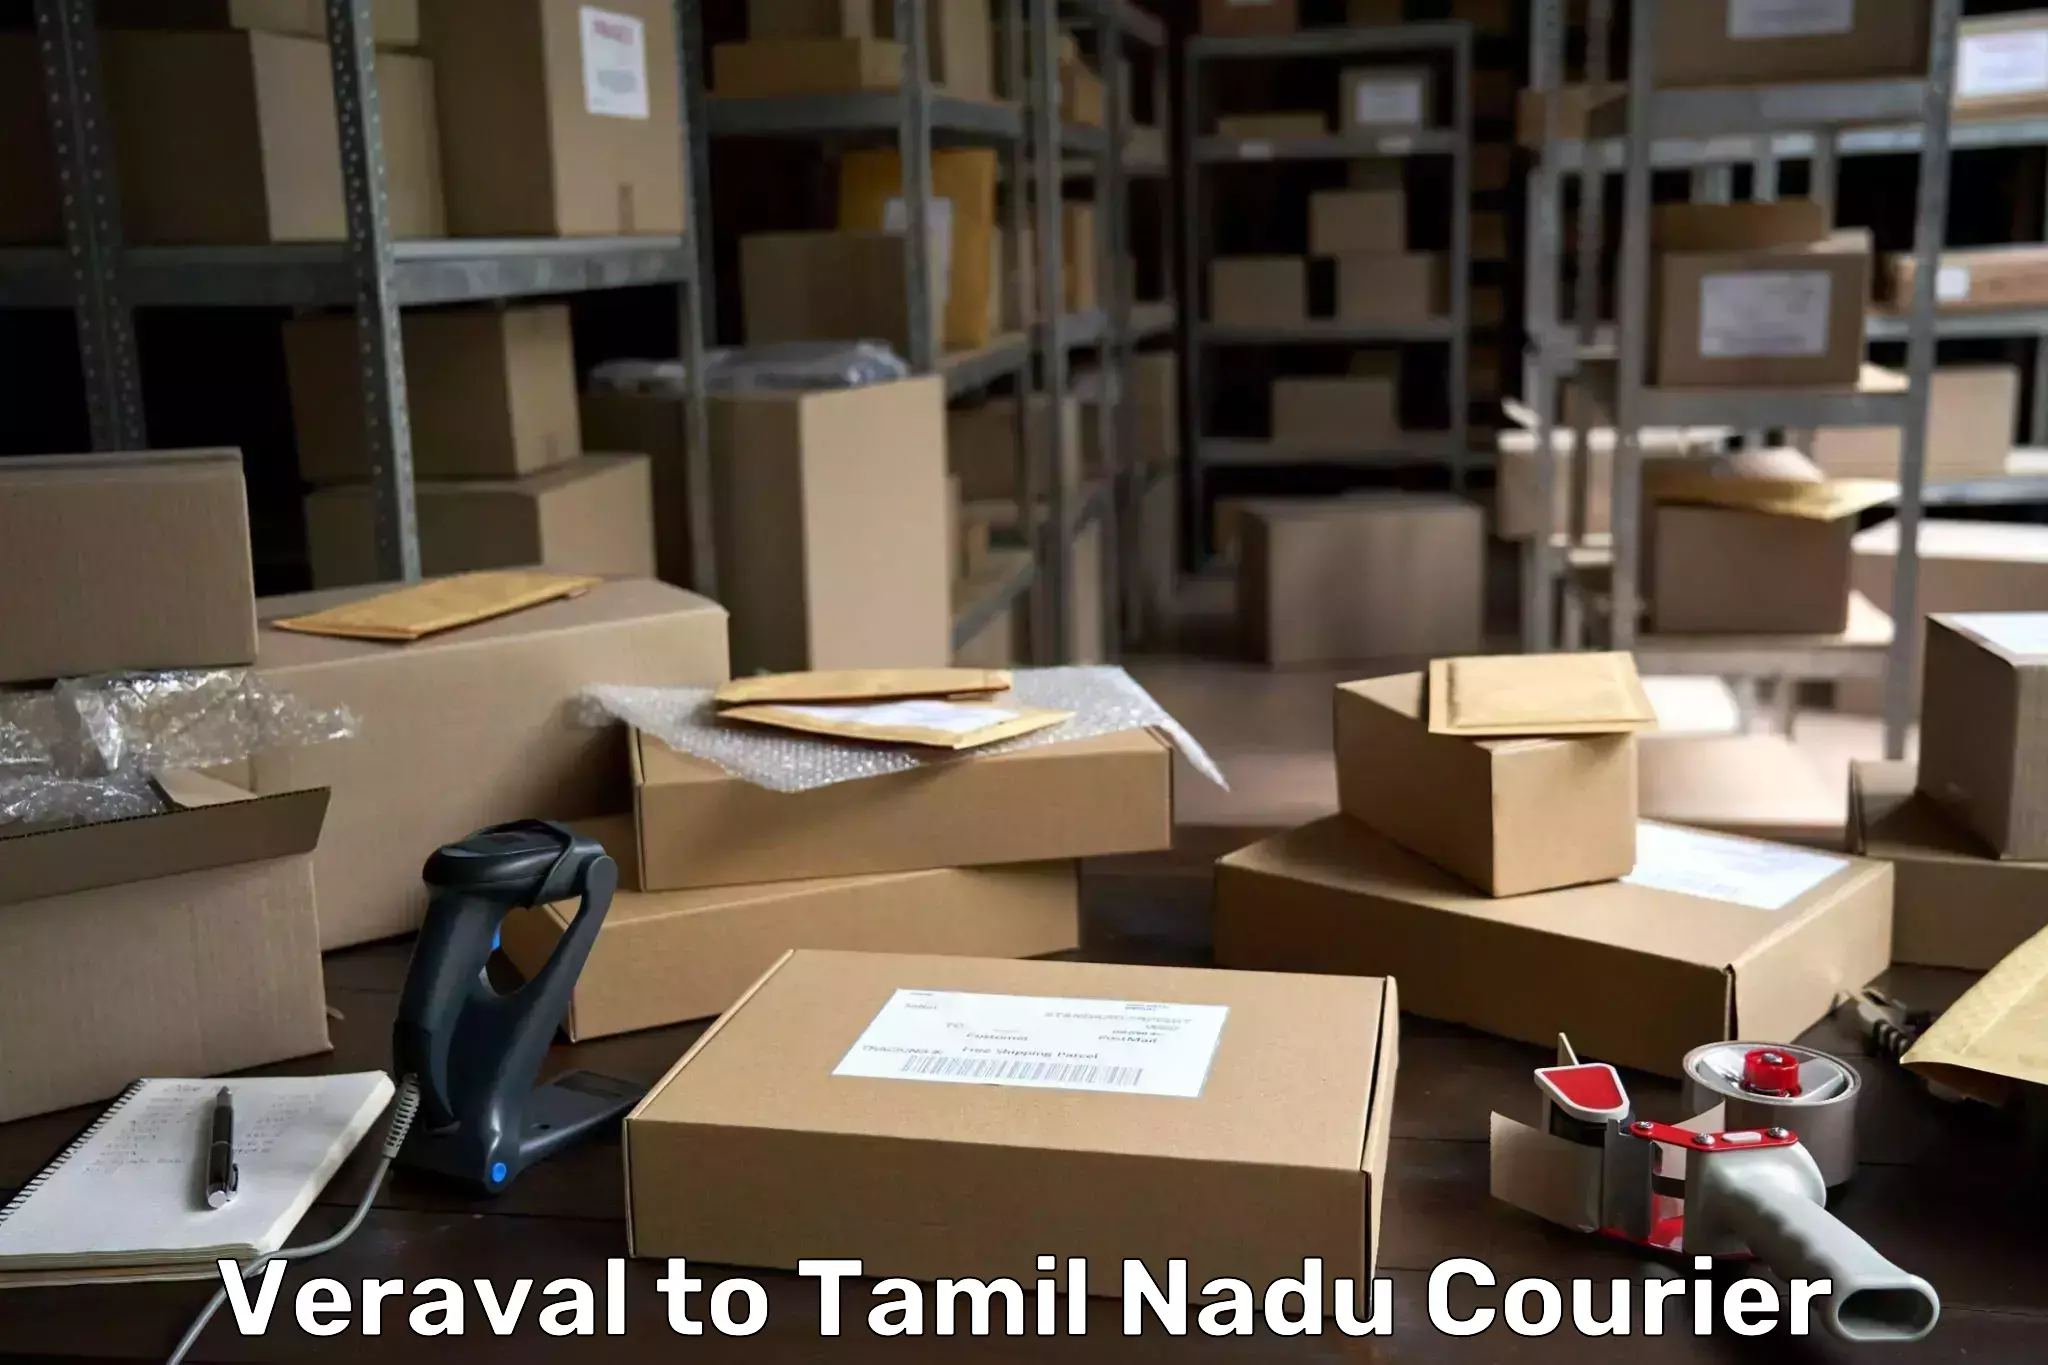 Express package services Veraval to Tamil Nadu Agricultural University Coimbatore